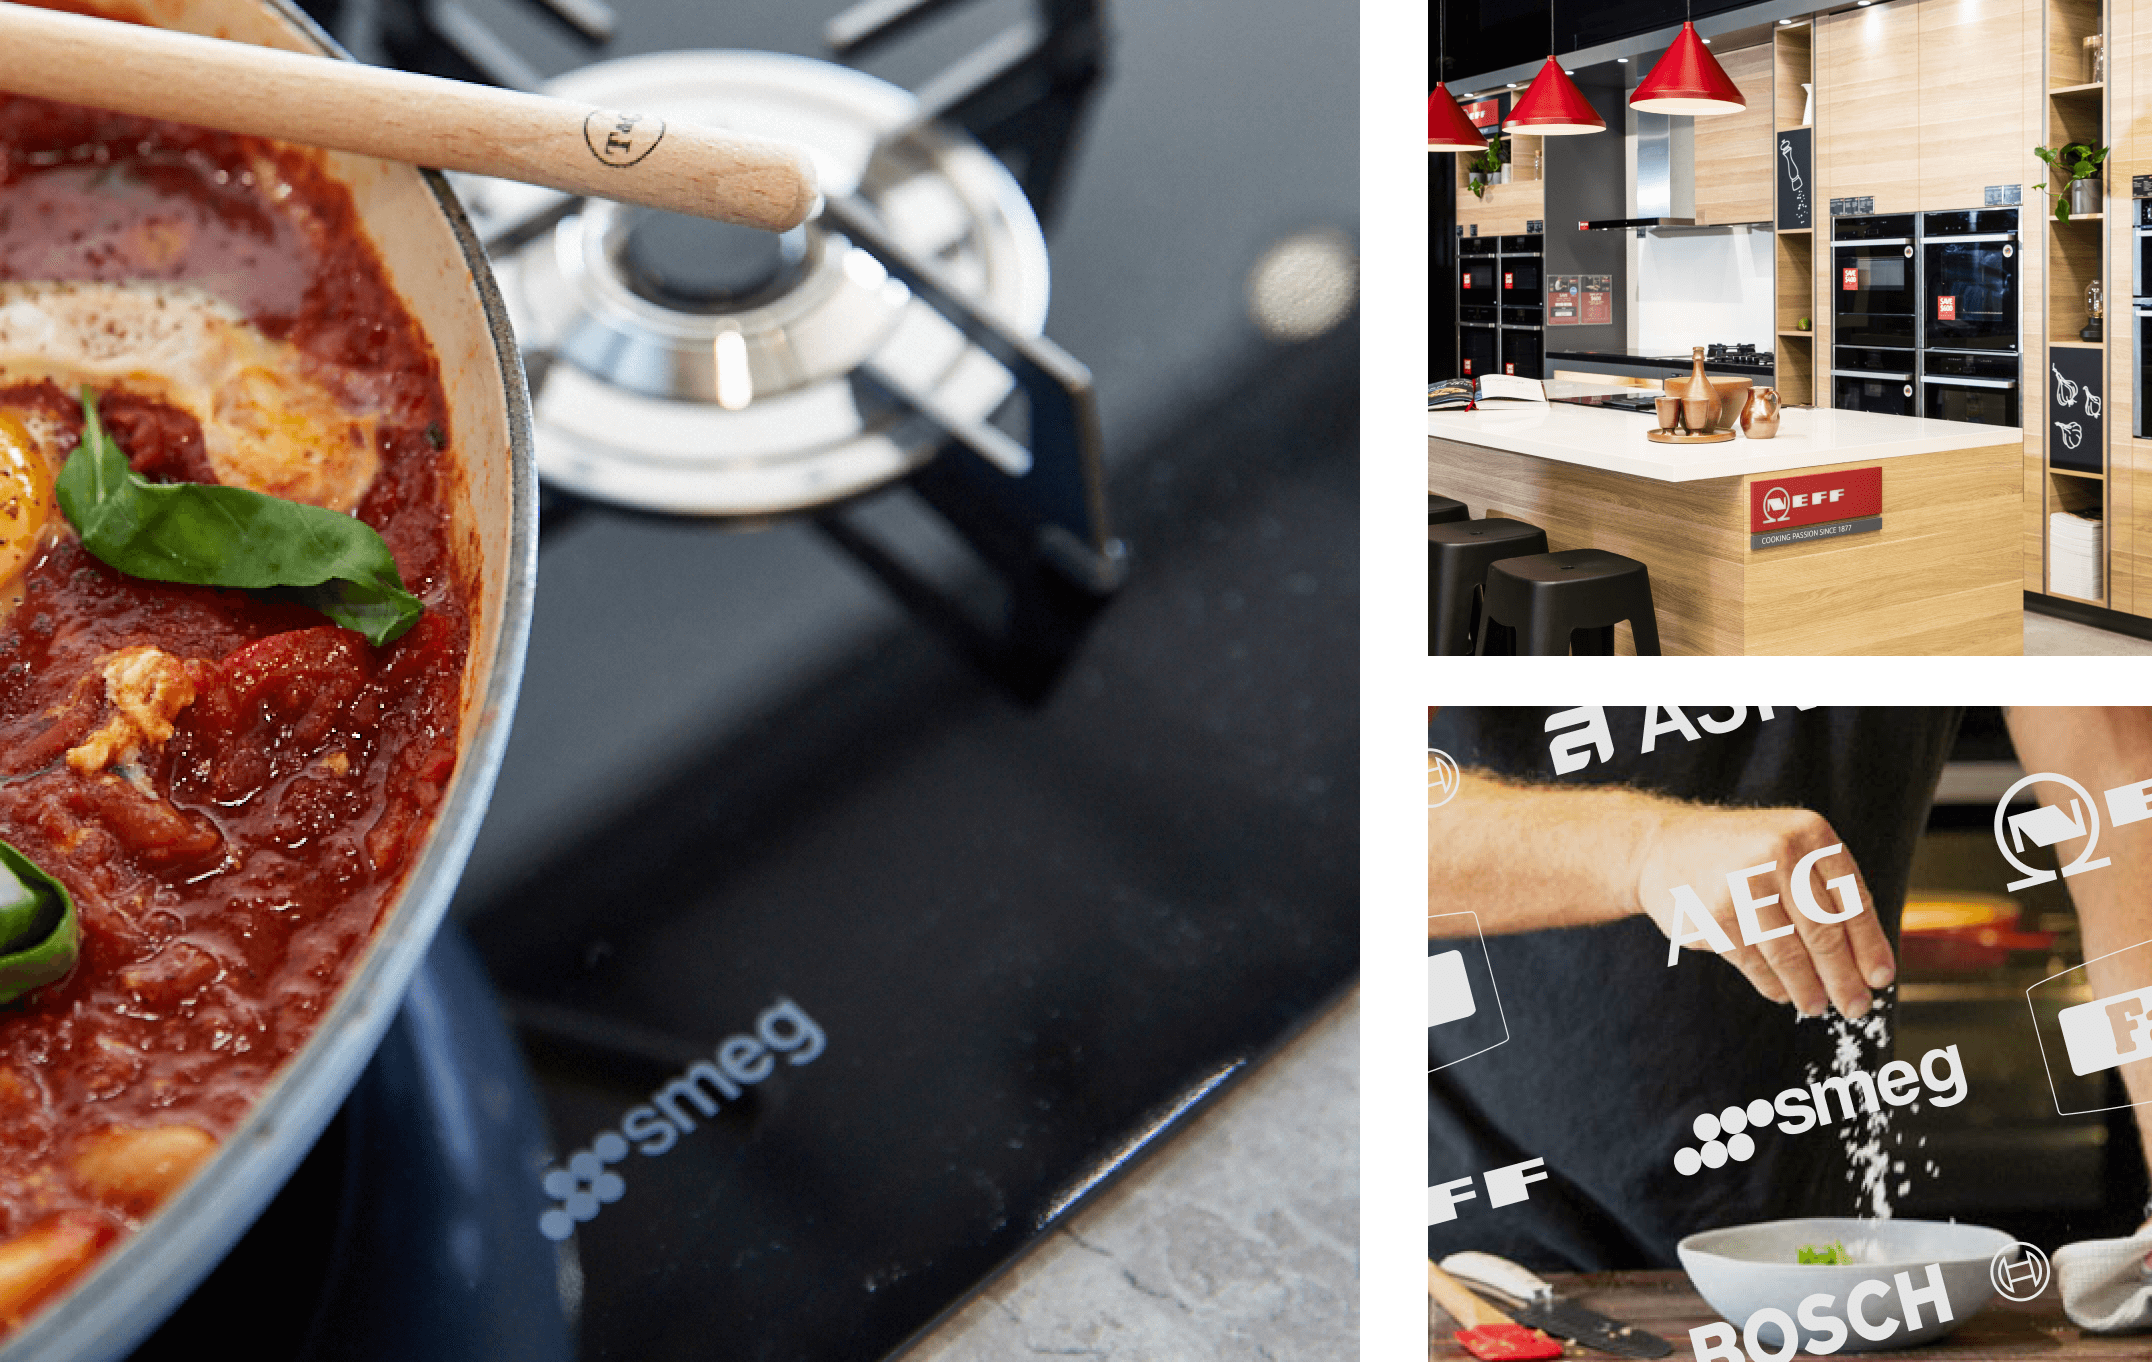 Live Cooking Demonstrations With The World’s Best Brands | Hart & Co.